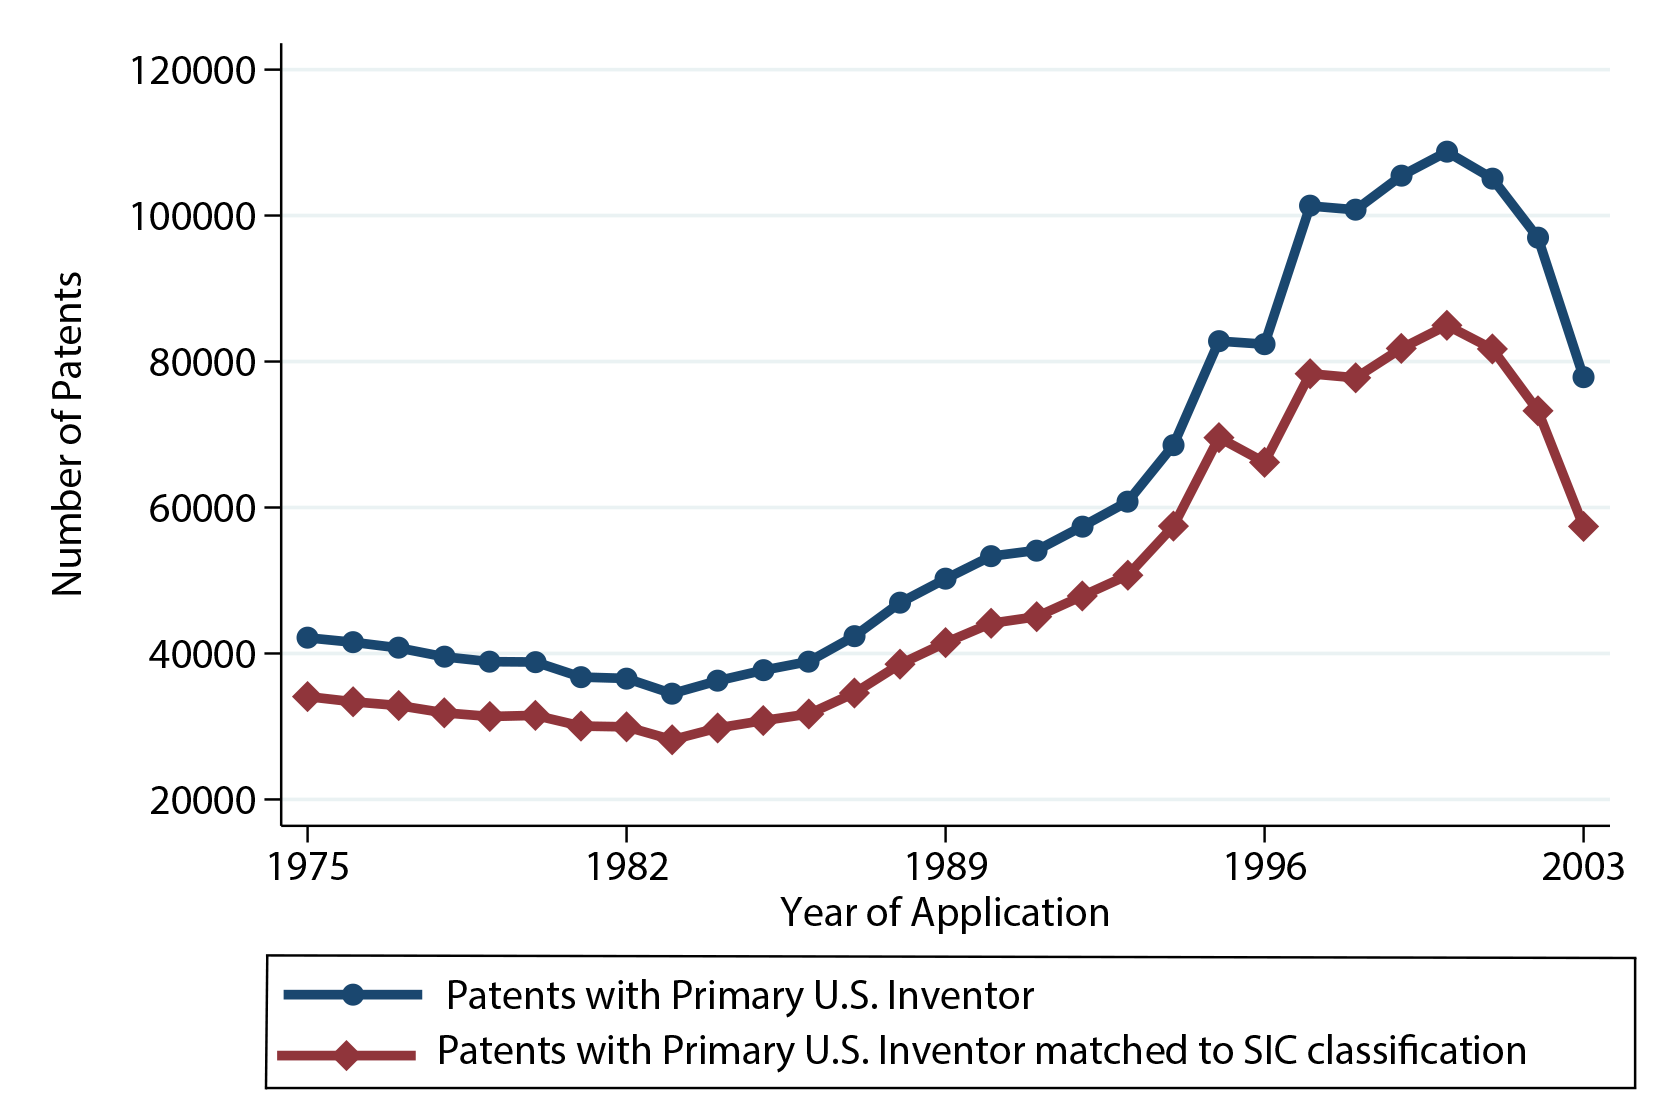 Figure 1. Total Patents, 1975-2003. See accessible link for data description.